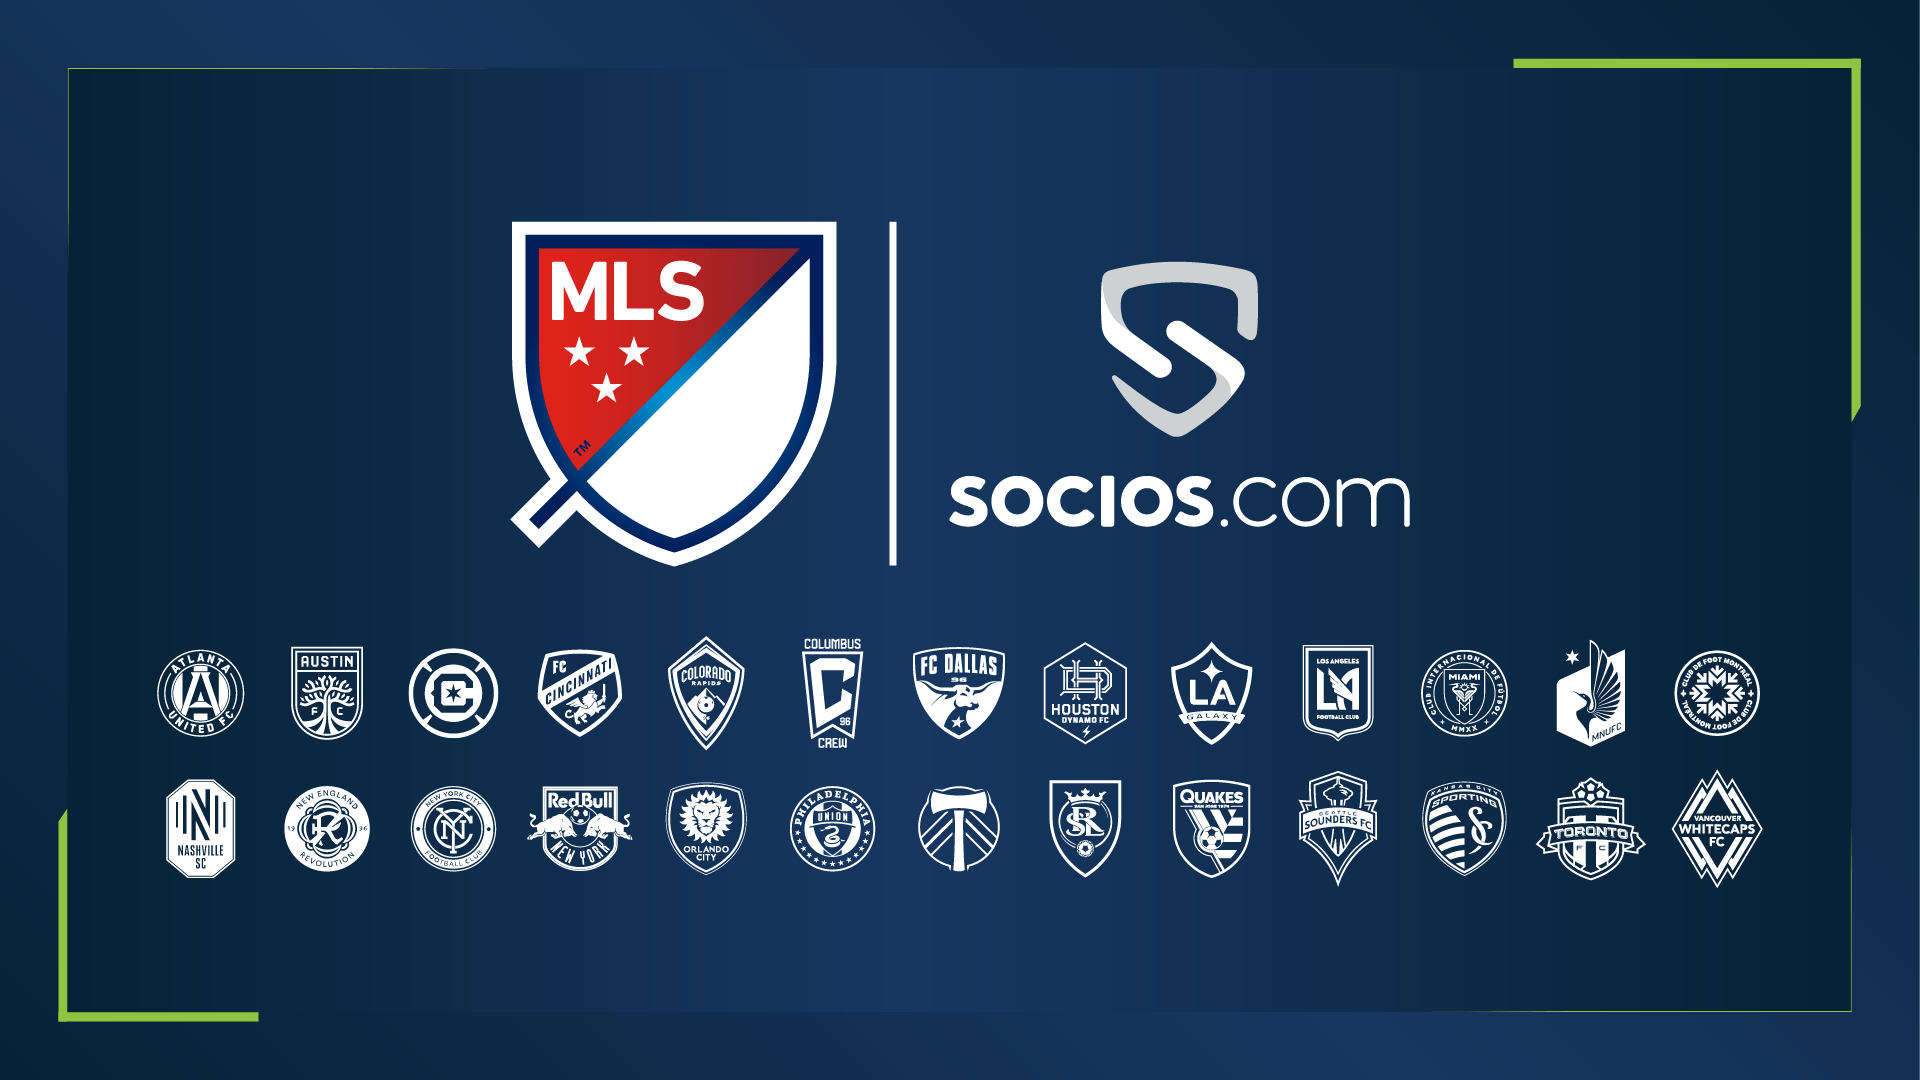 Socios.com becomes official fan loyalty partner of 26 MLS clubs